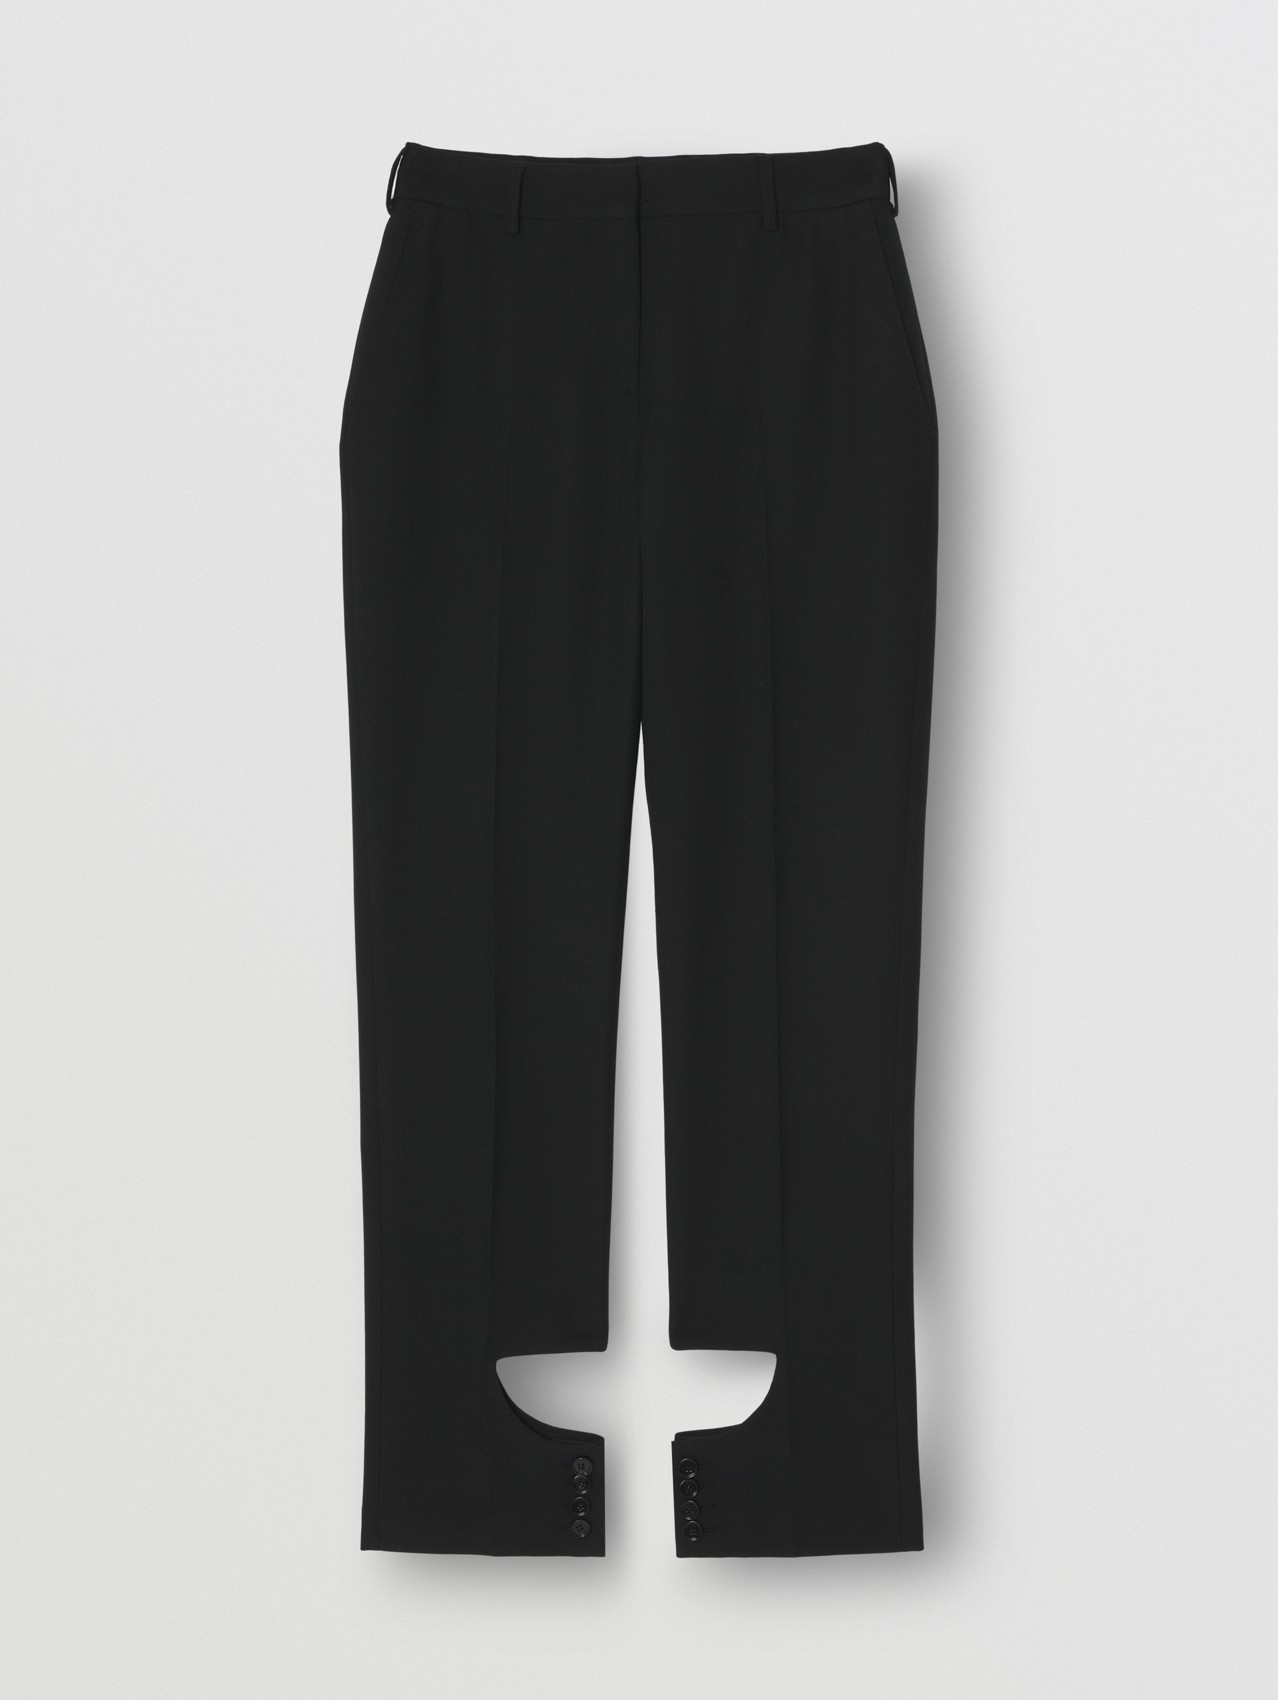 Cut-out Detail Wool Tailored Trousers in Black